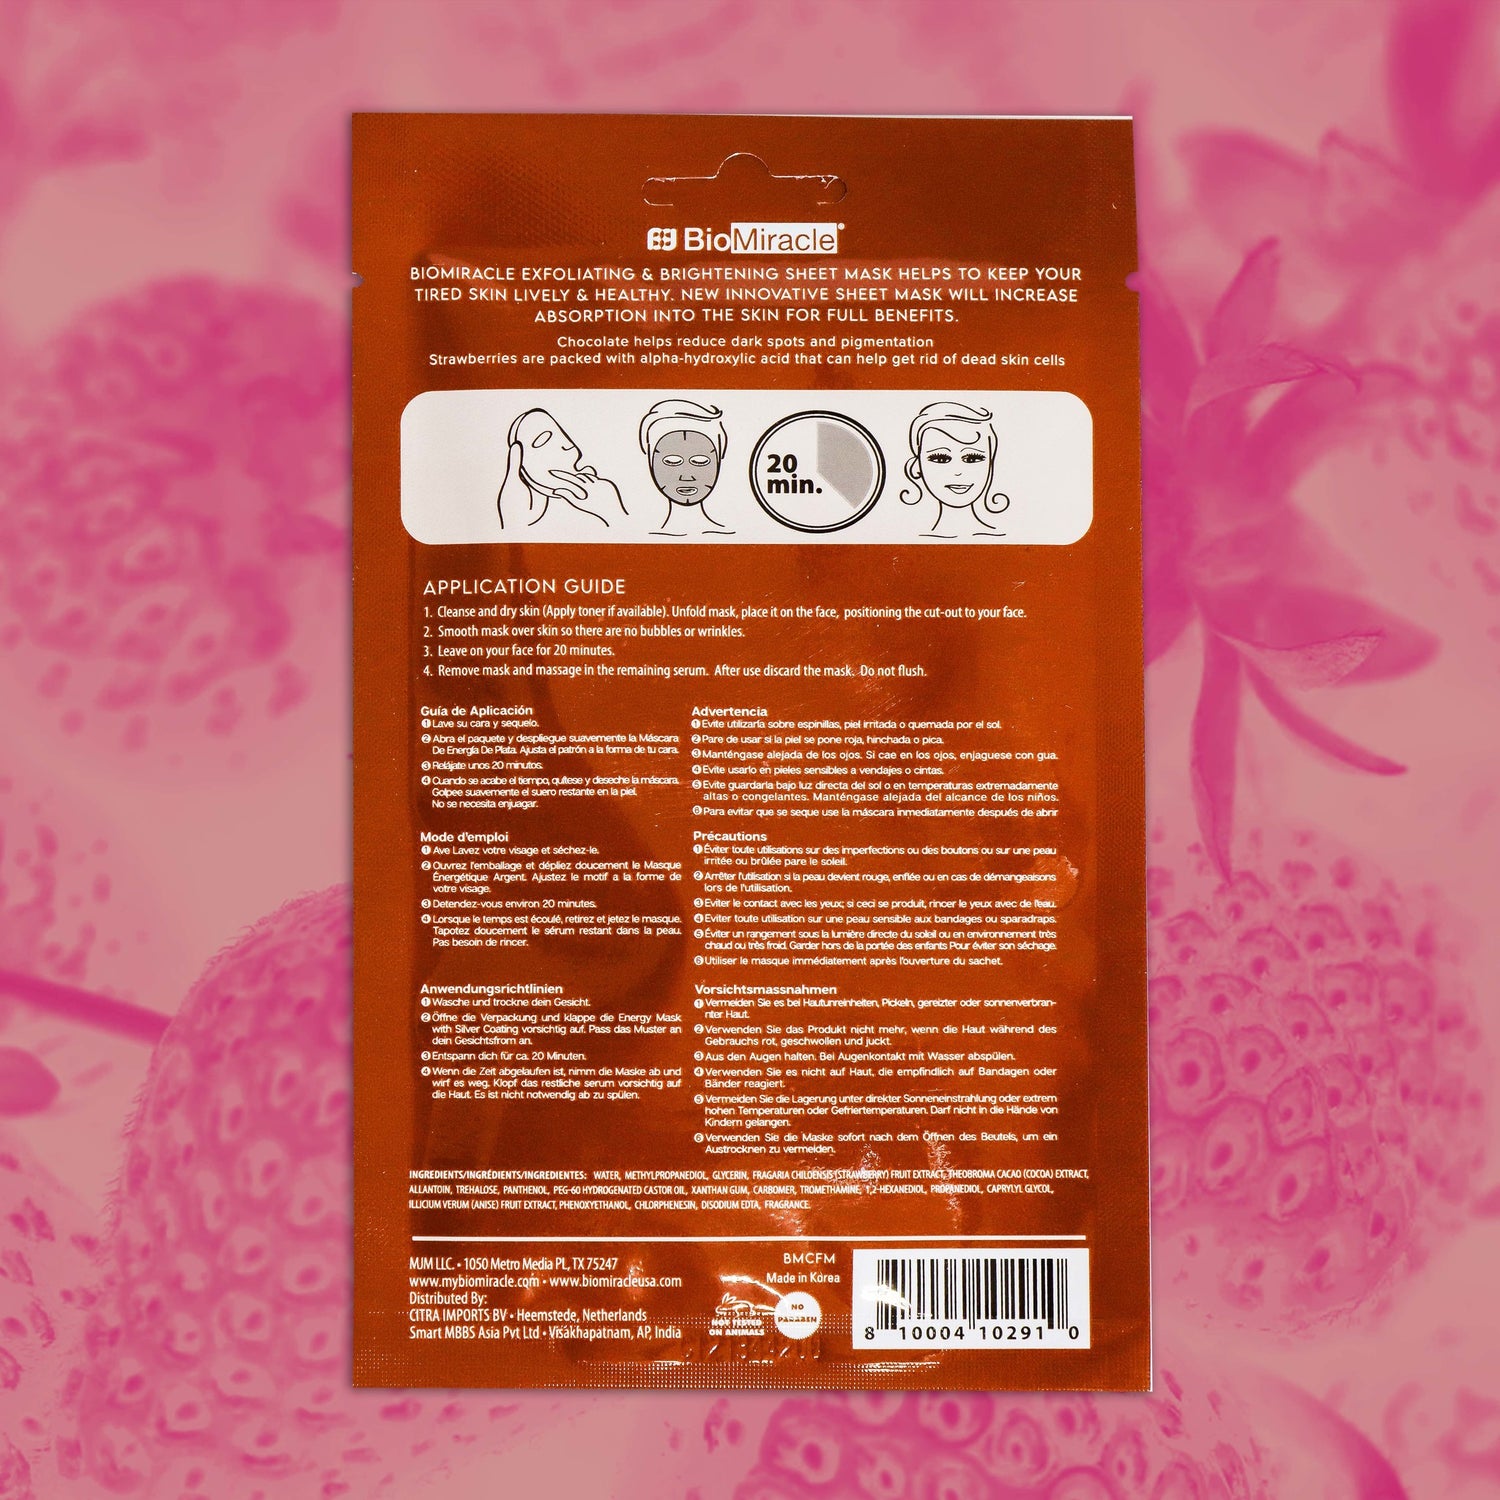 Exfoliating and Brightening Chocolate Face Mask 10 Pack